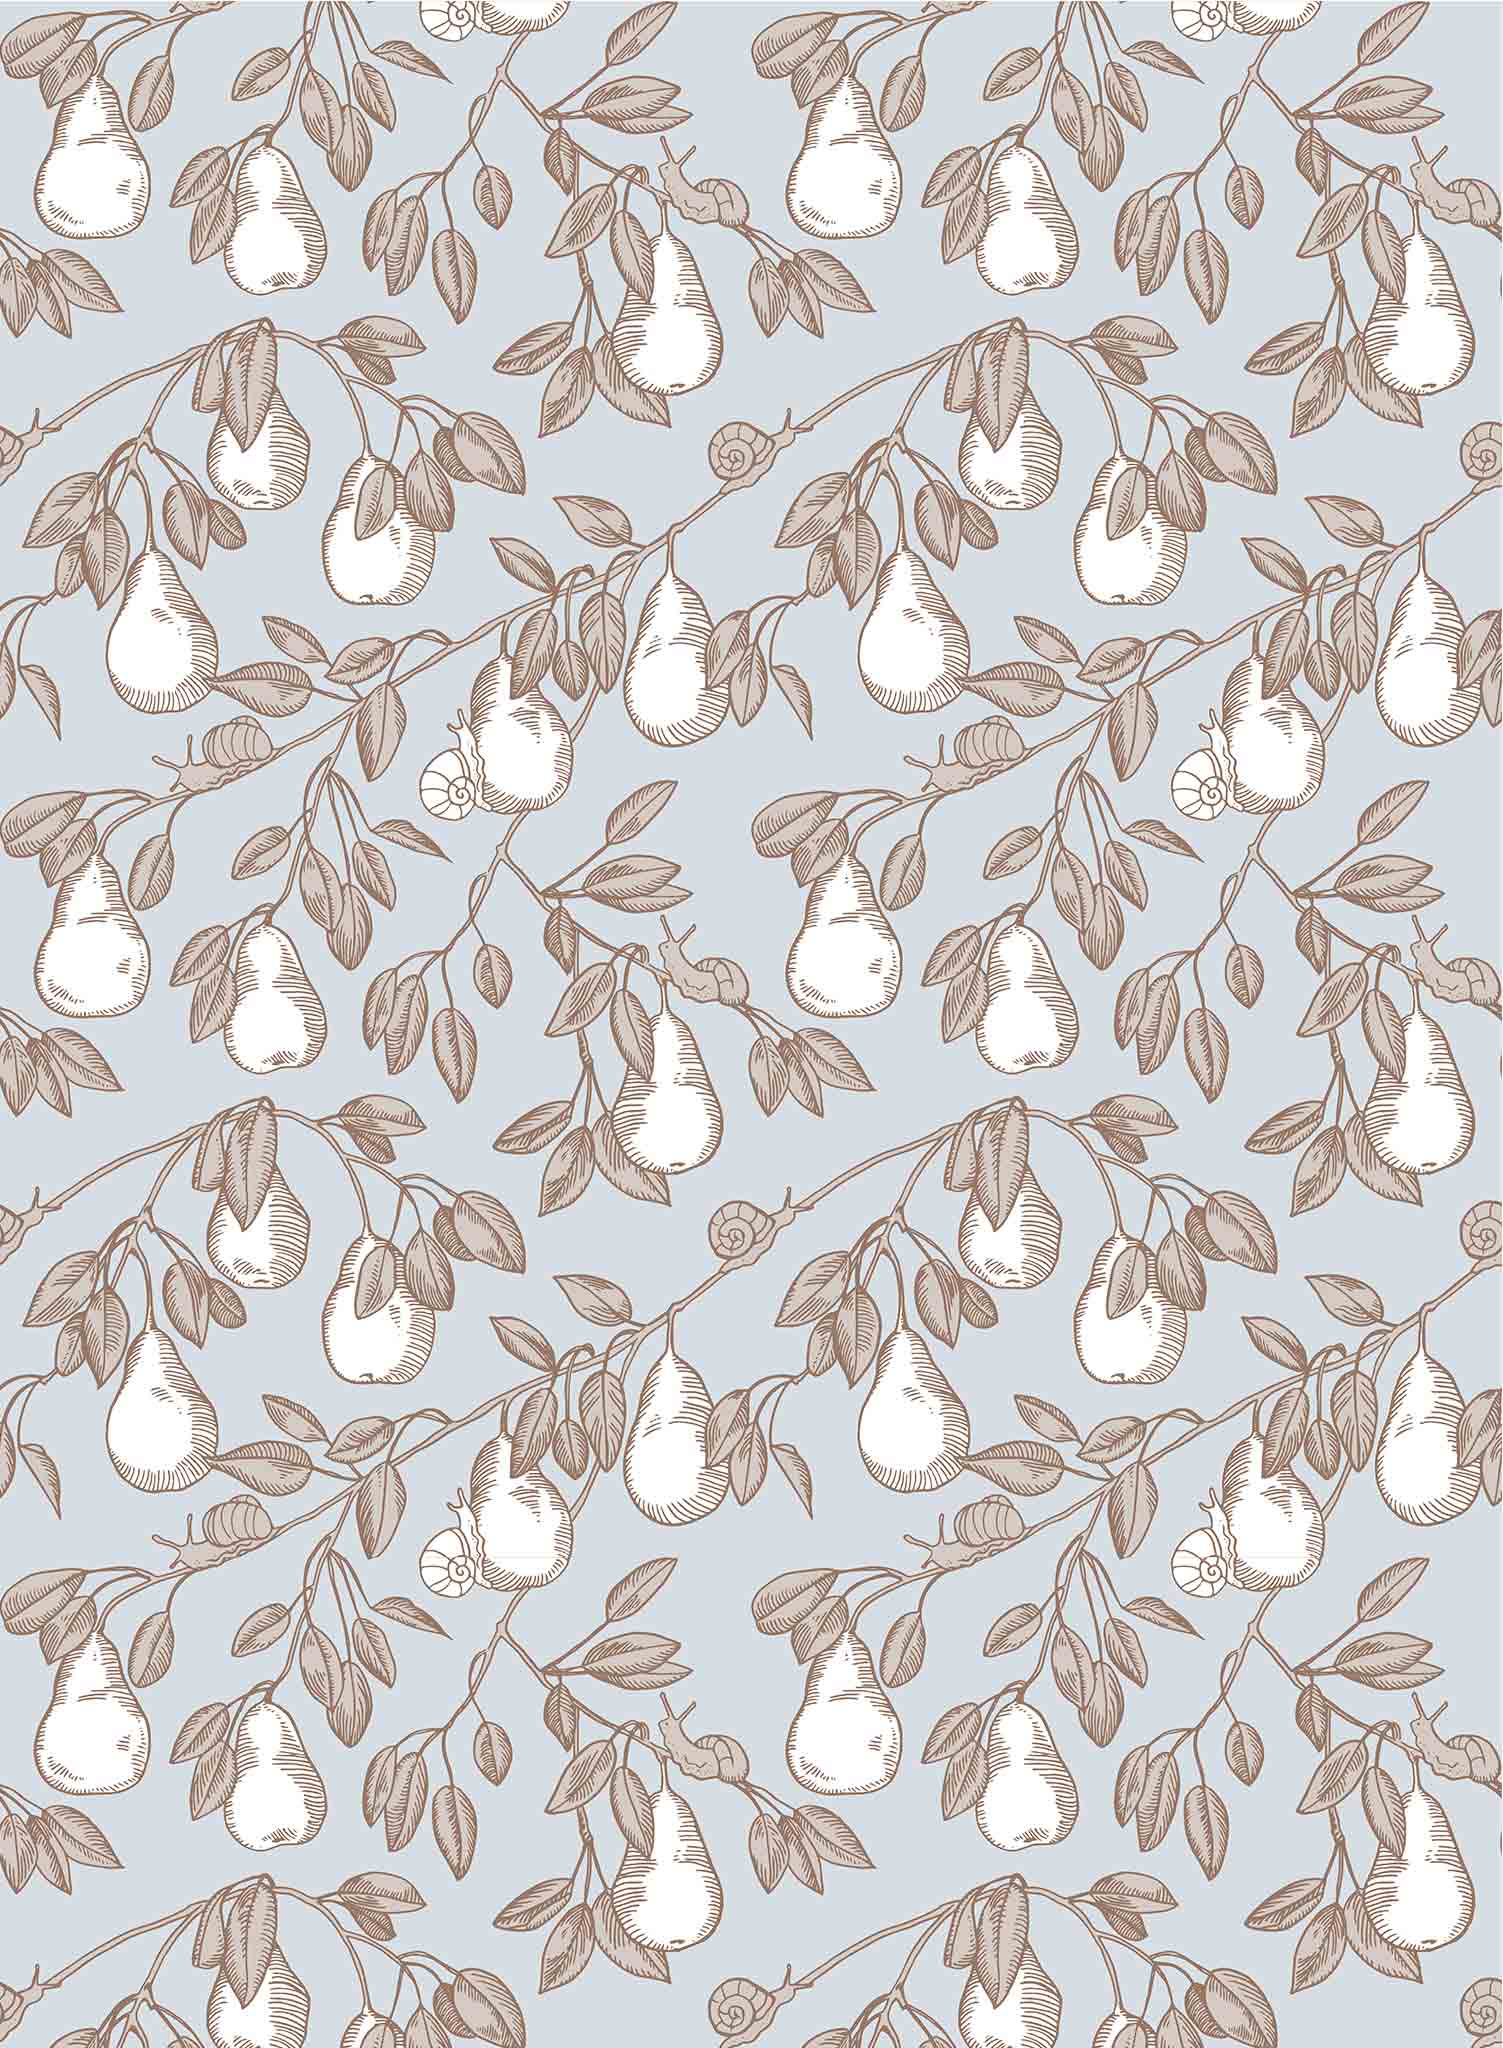 Pear Picking is a minimalist wallpaper by Opposite Wall of a series of pears hanging from its tree.